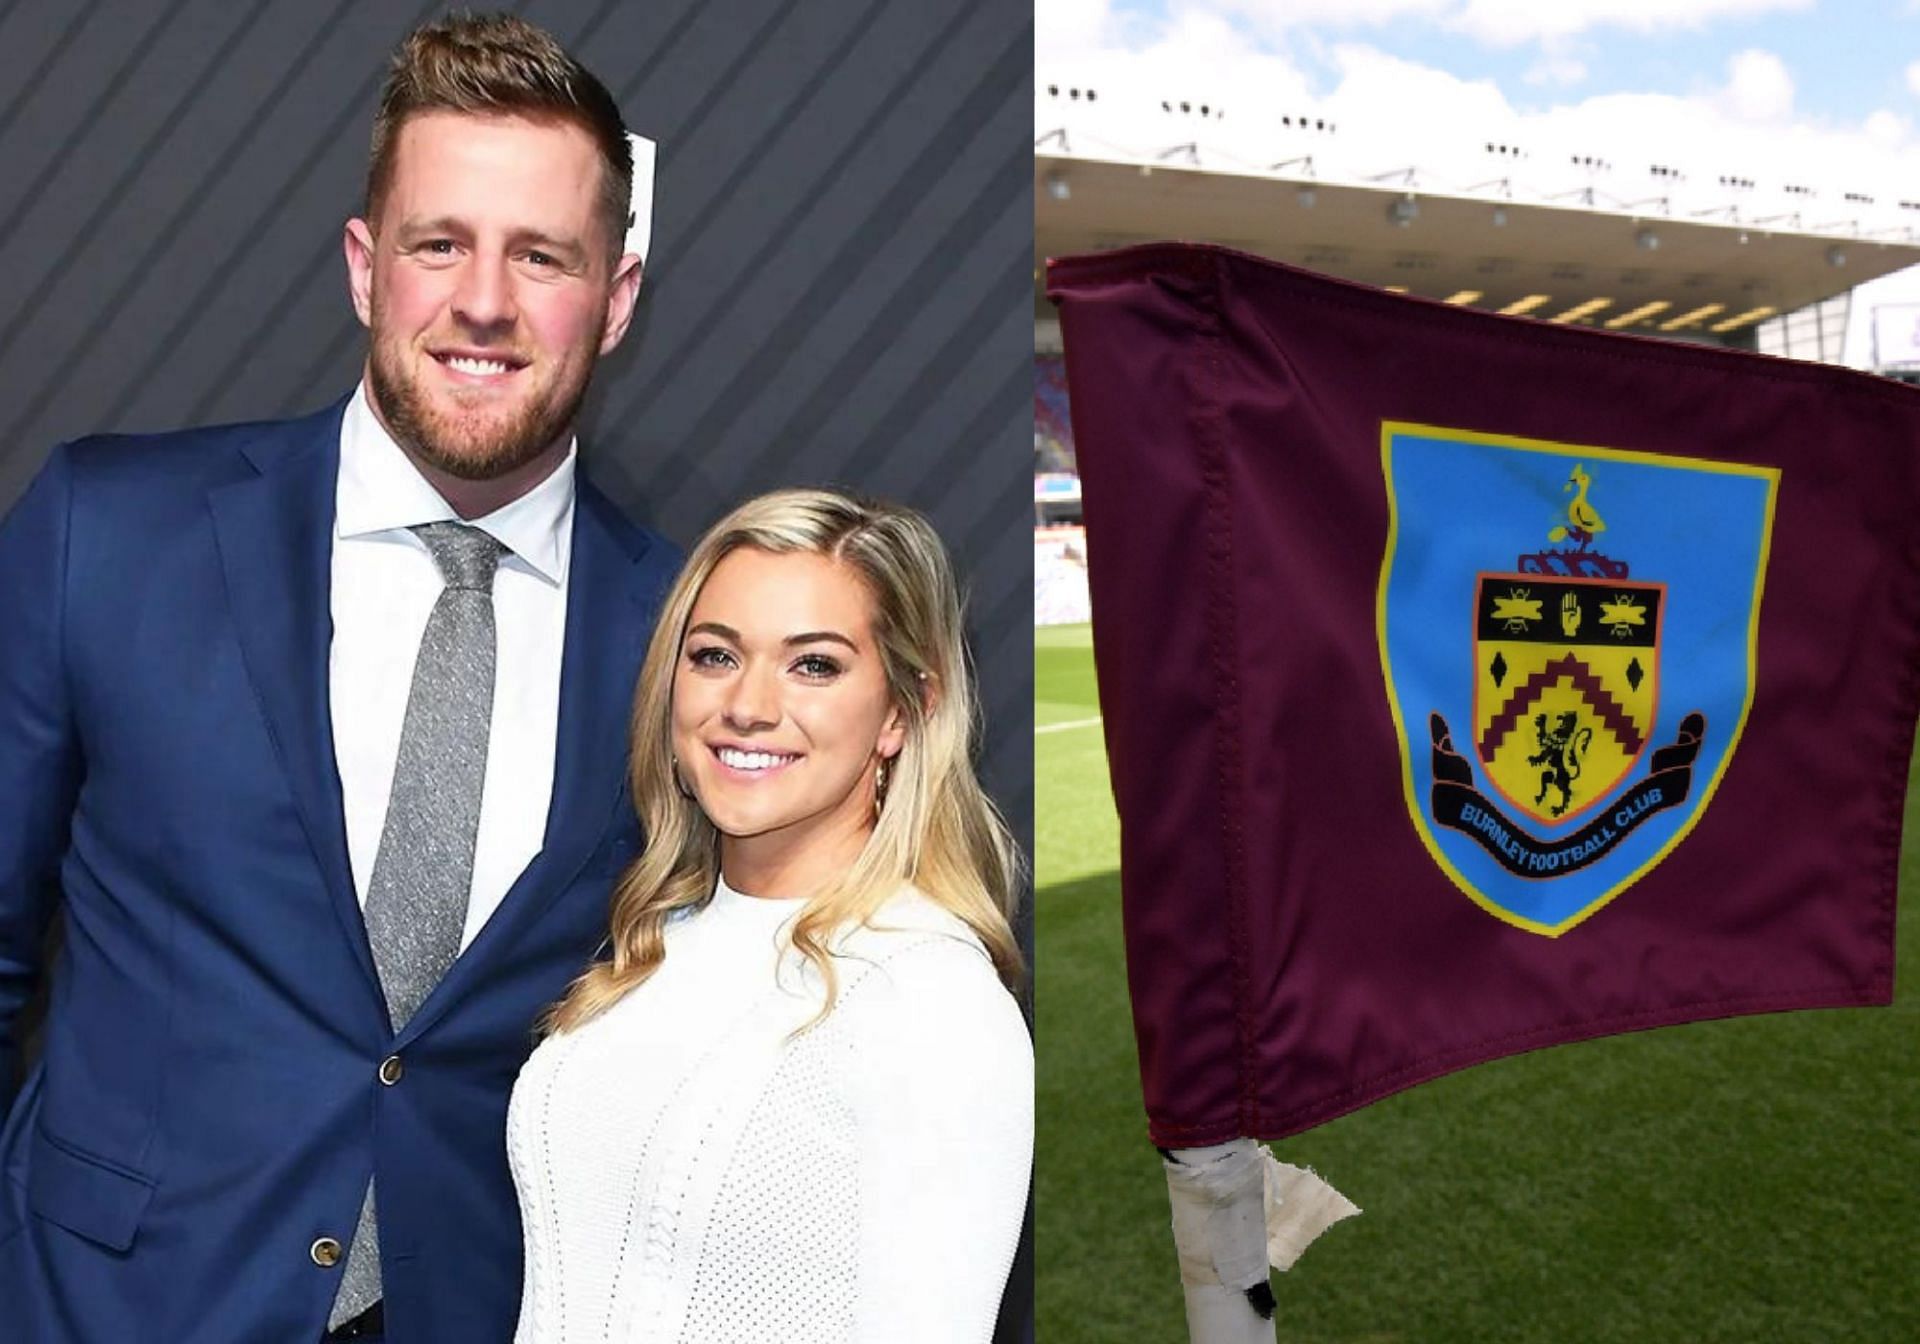 Why did JJ Watt and wife Kealia invest in Burnley?